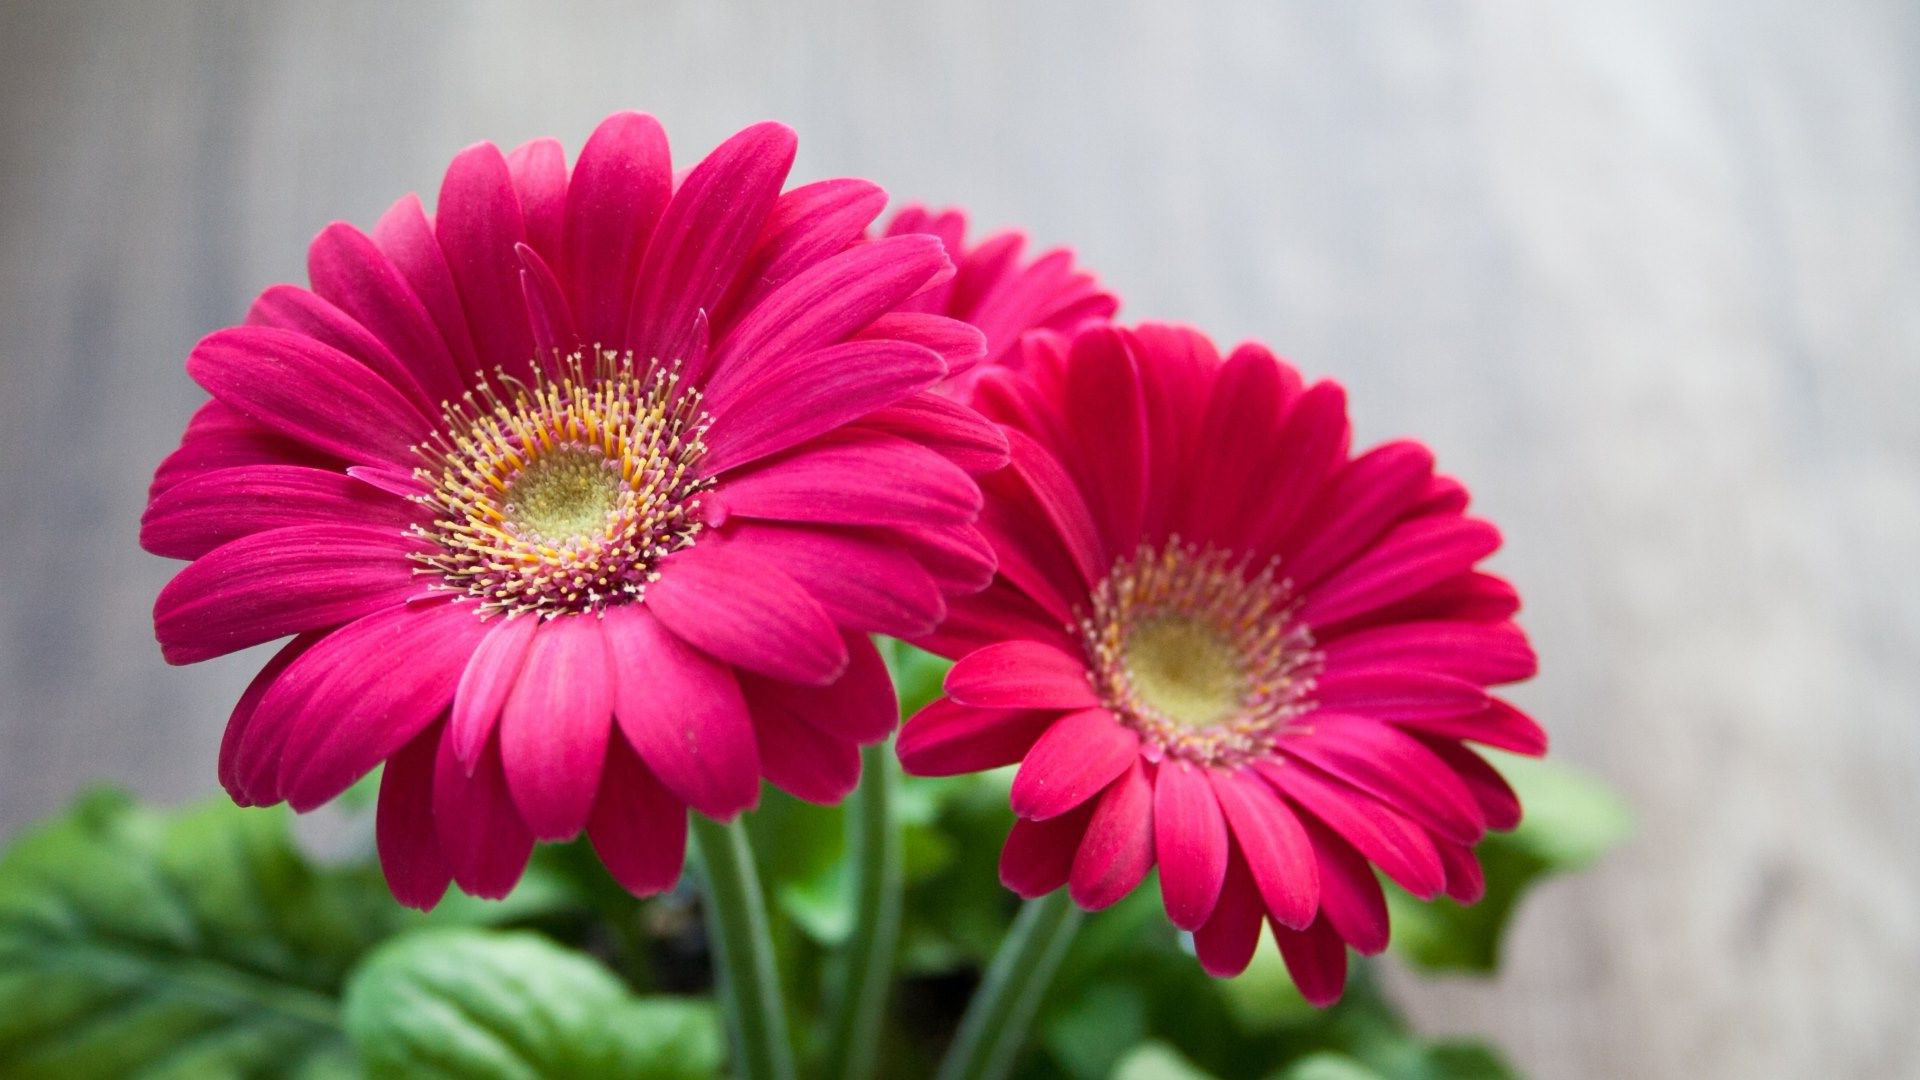 Best HD Wallpapers for Laptop 1080p with Pink Daisy Flower Images - HD ...